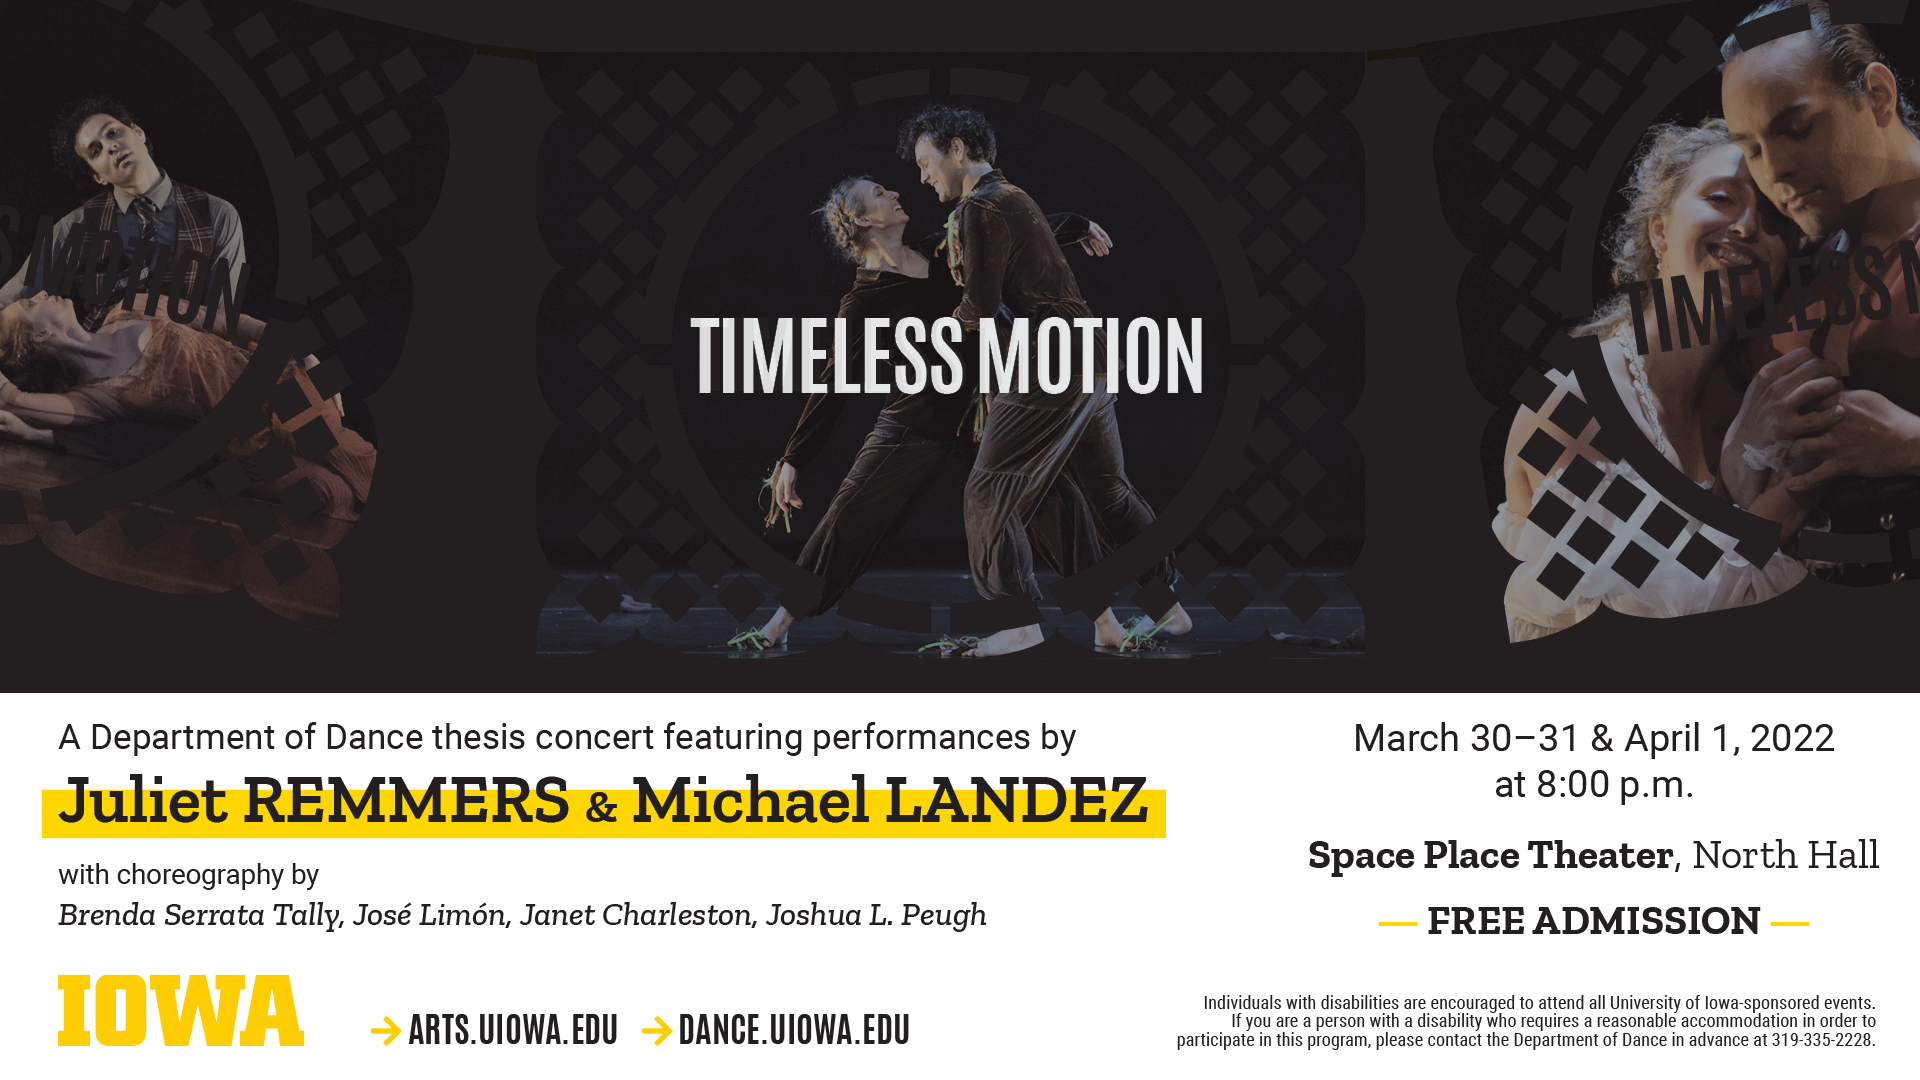 Timeless Motion A Department of Dance thesis concert featuring performances by Juliet REMMERS & Michael LANDEZ. with choreography by Brenda Serrata Tally, Jose Limon, Janet Charleston, Joshua L. Peugh March 30 - 31 and April 1, 2022. at 8 p.m. Space Place Theater, North Hall. FREE ADMISSION. Arts.uiowa.edu dance.uiowa.edu